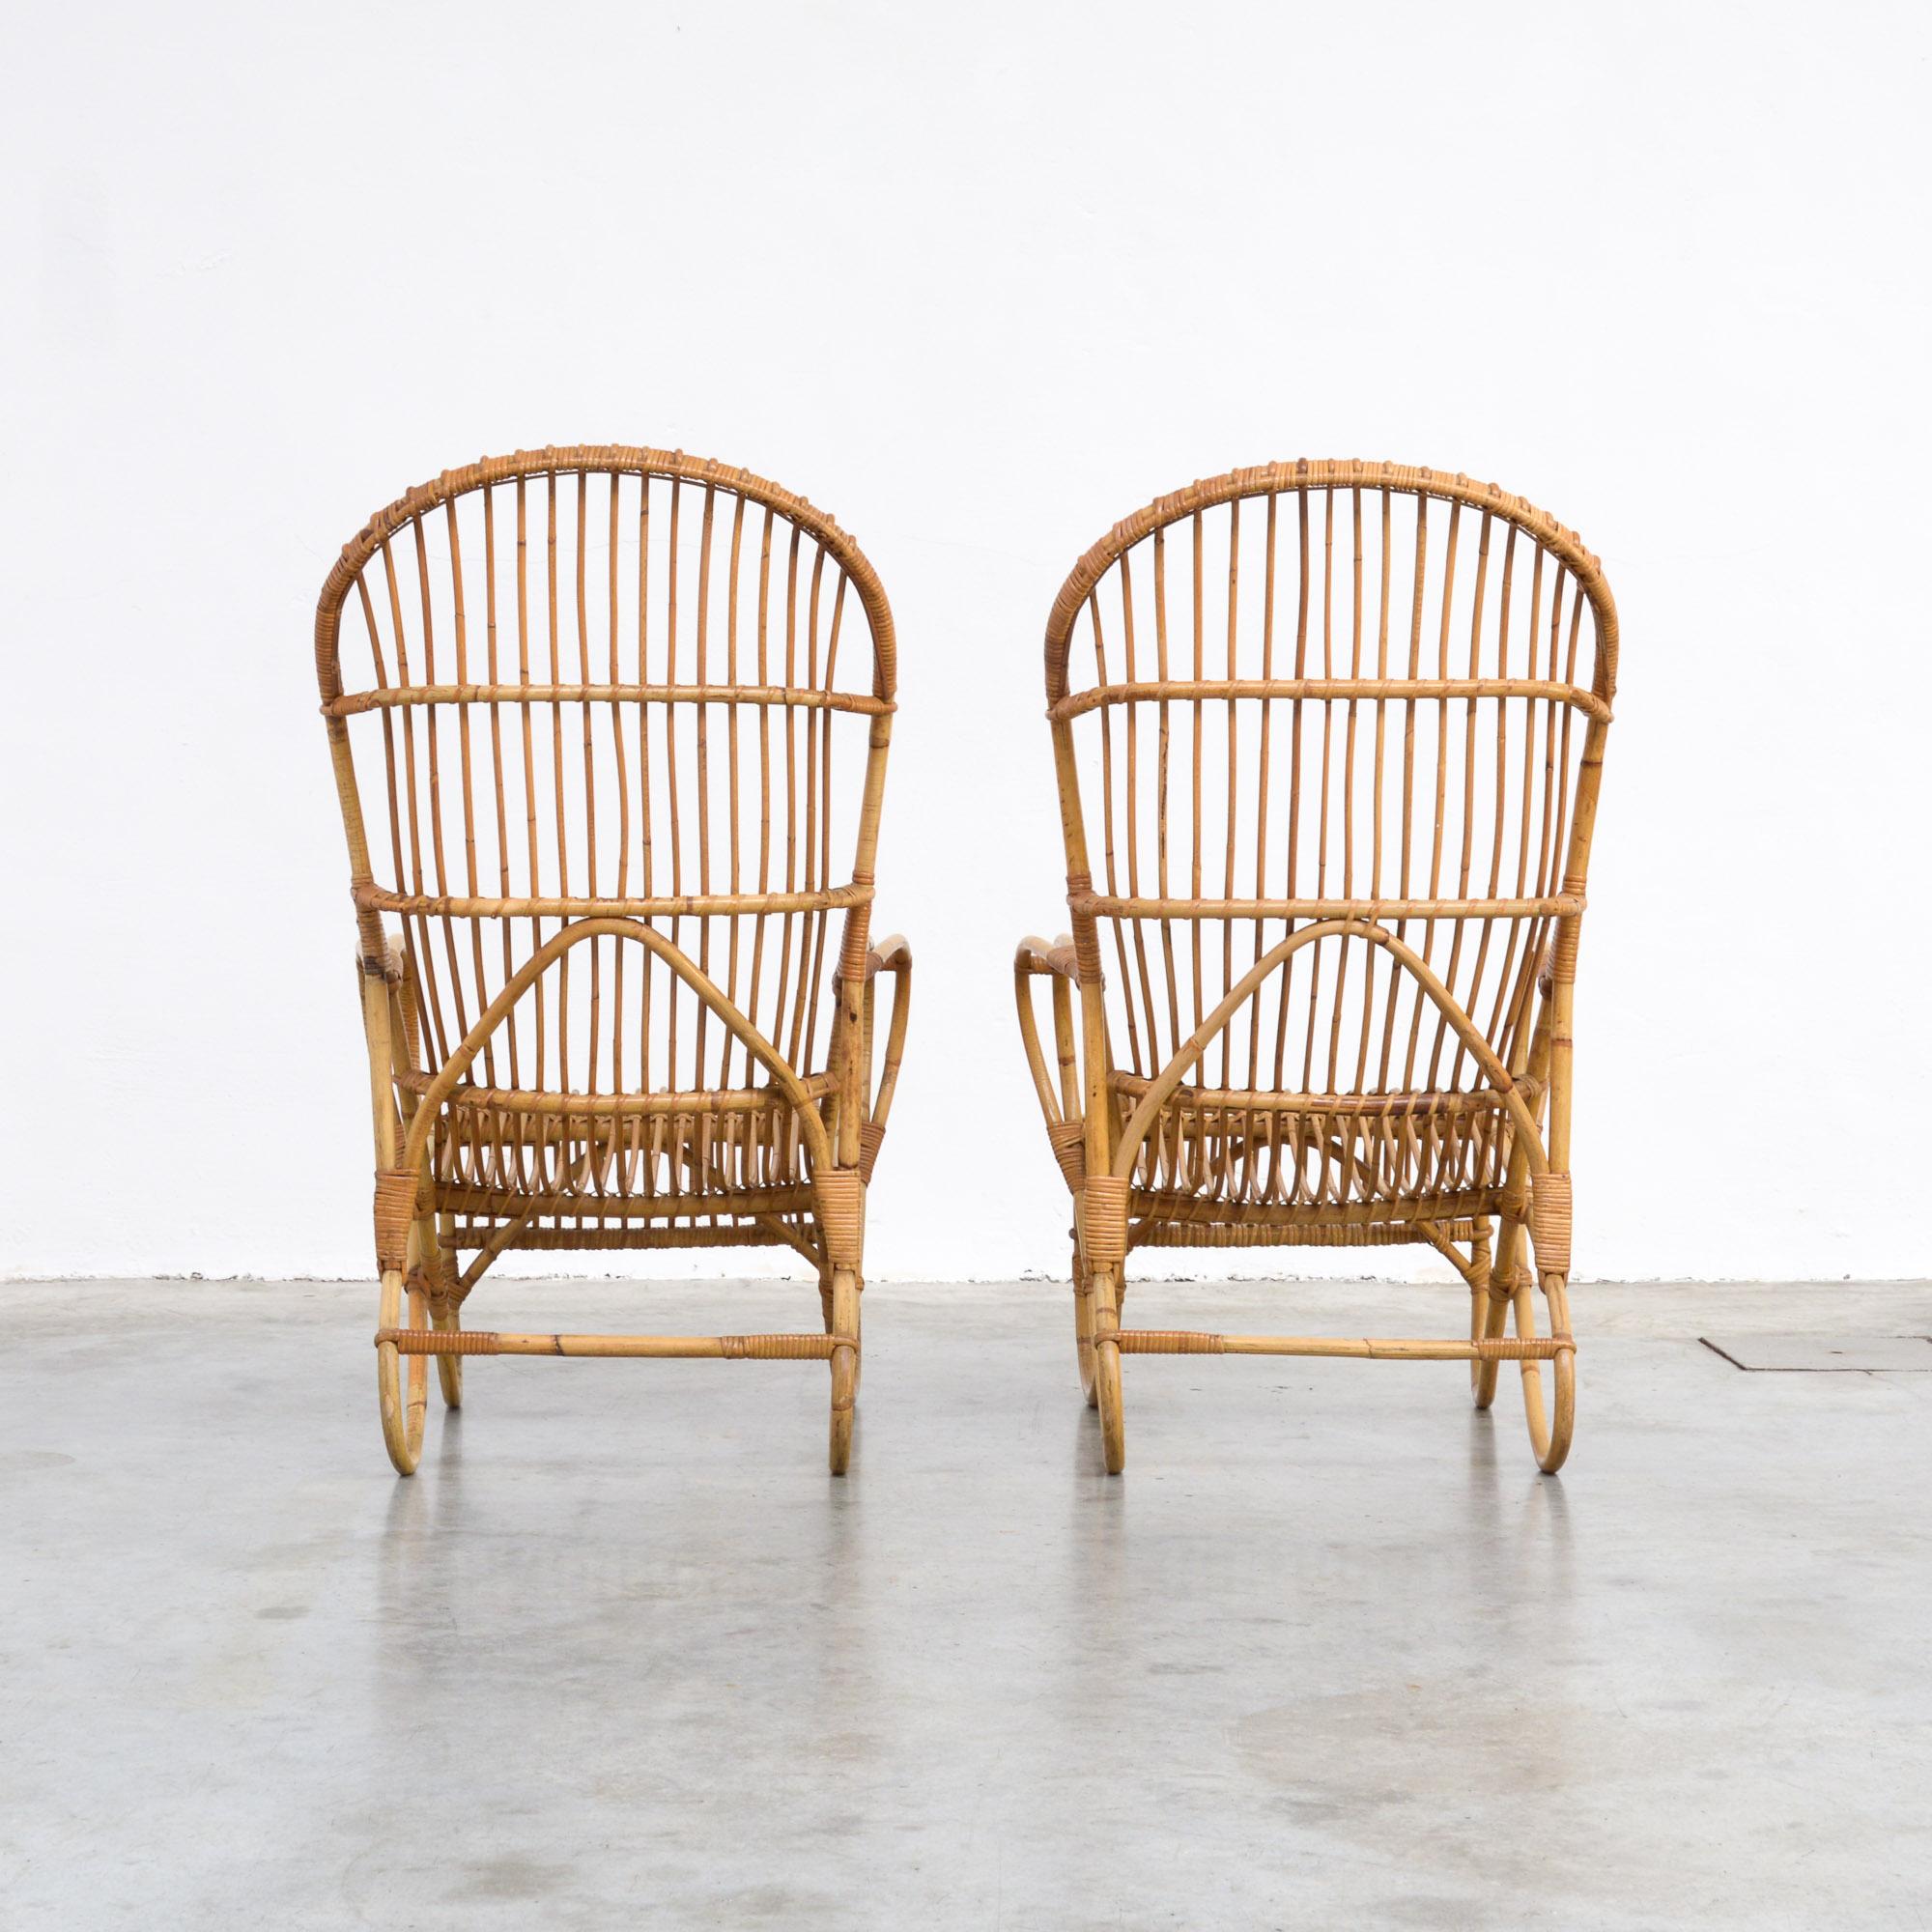 These elegant rattan armchairs can be dated in the 1950s.
It is a Dutch design from F. Paulussen, made by Schutting in the Frisian town of Noordwolde, known for its rattan production in the 1940s and 1950s.
Rattan was a popular material, used